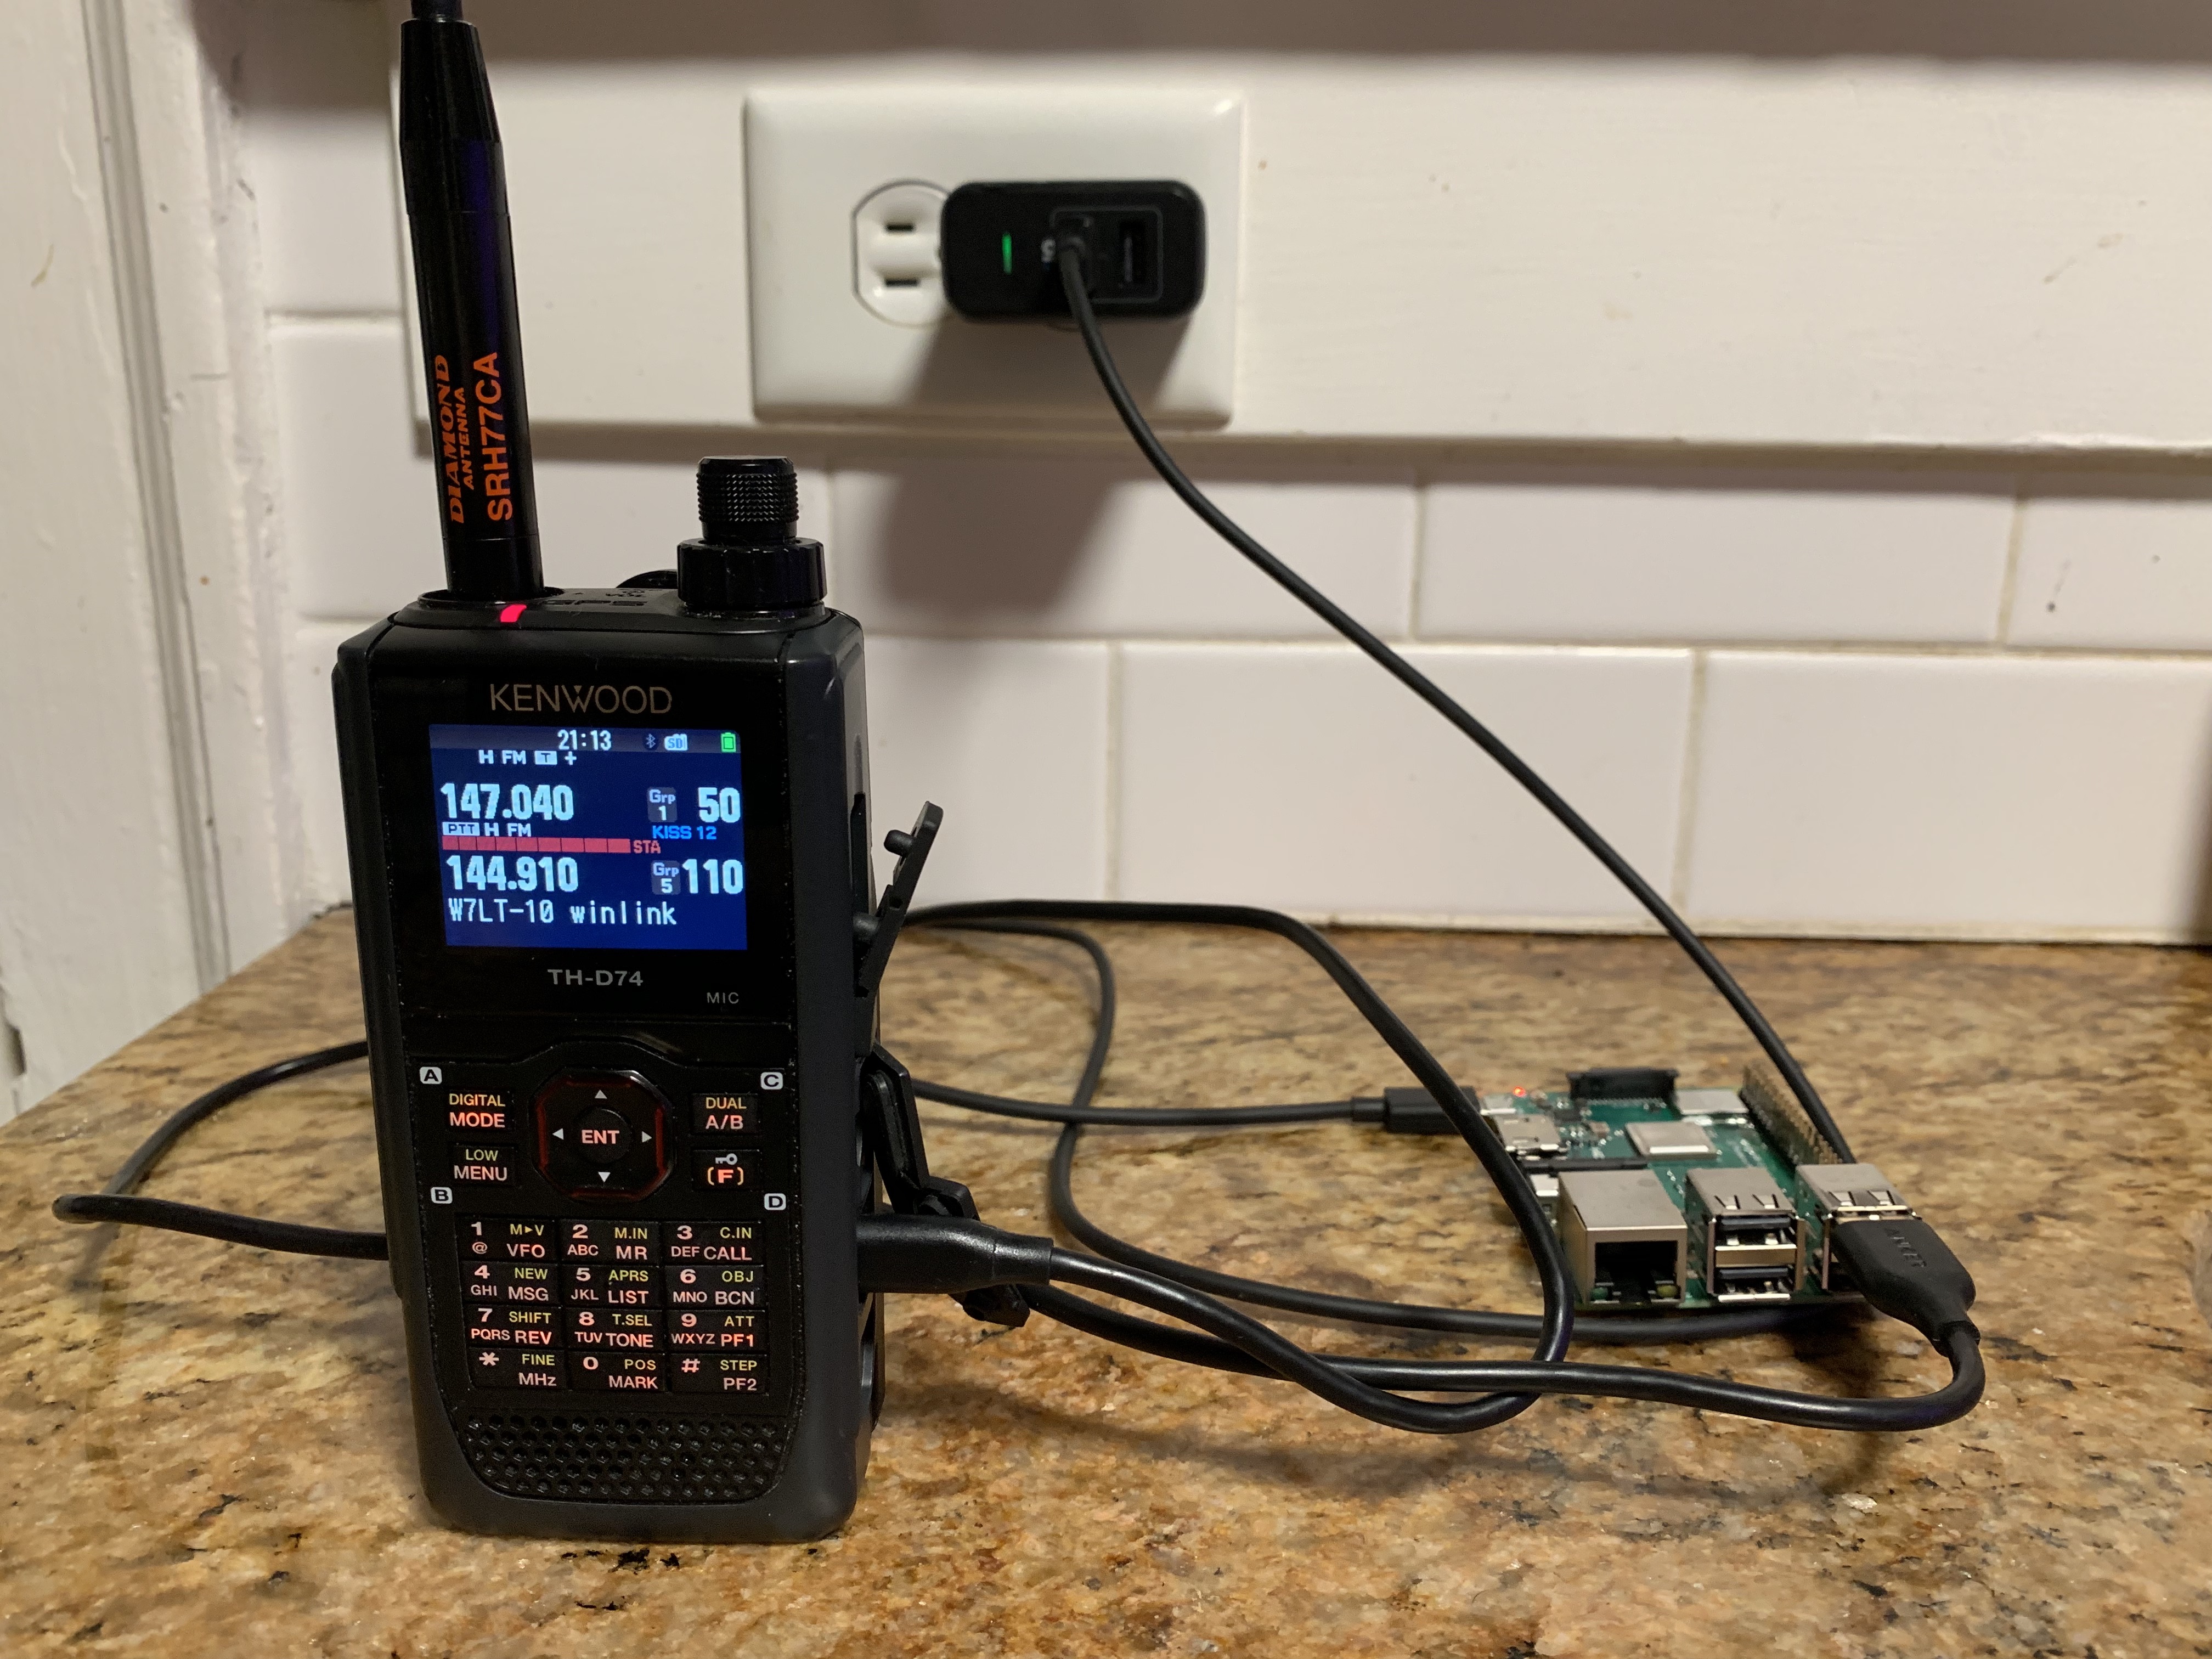 TH-D74a and Raspberry Pi wired up